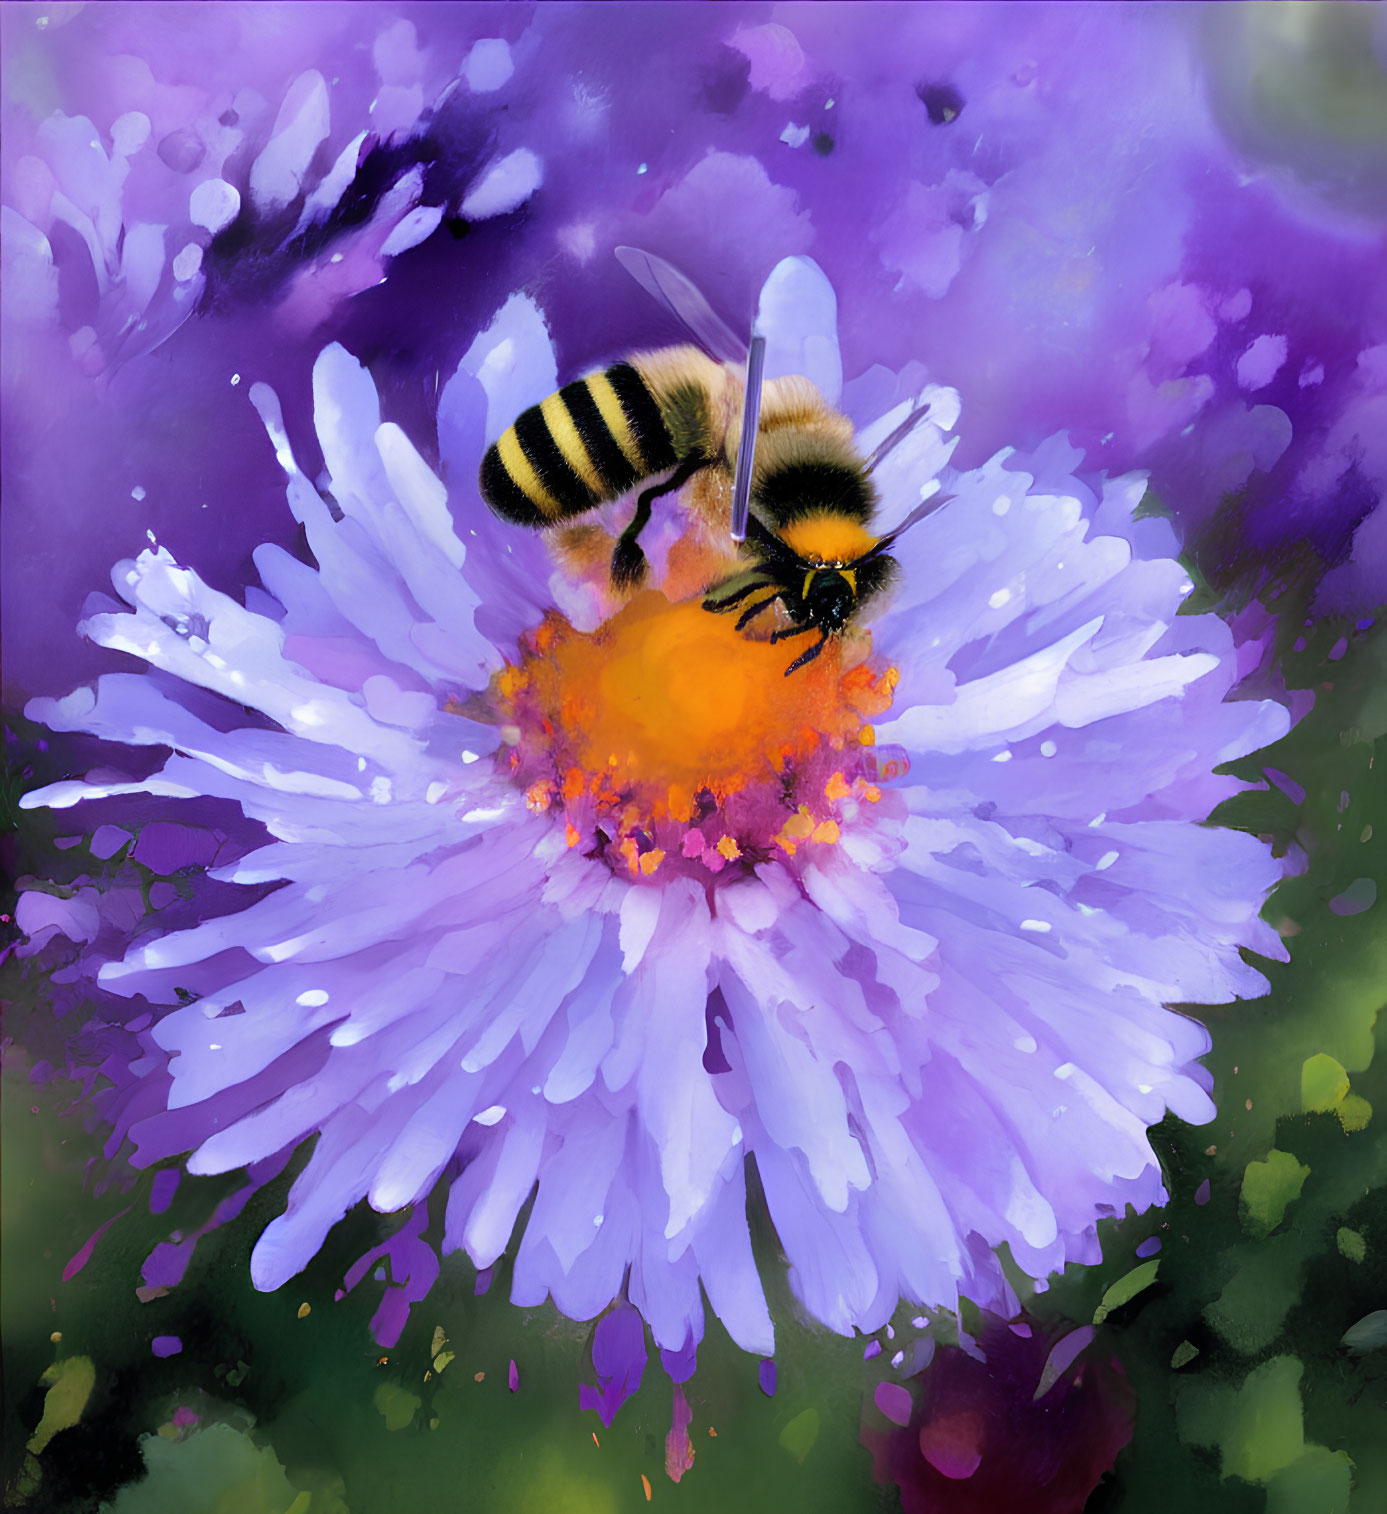 Bumblebee collecting nectar on vibrant purple flower